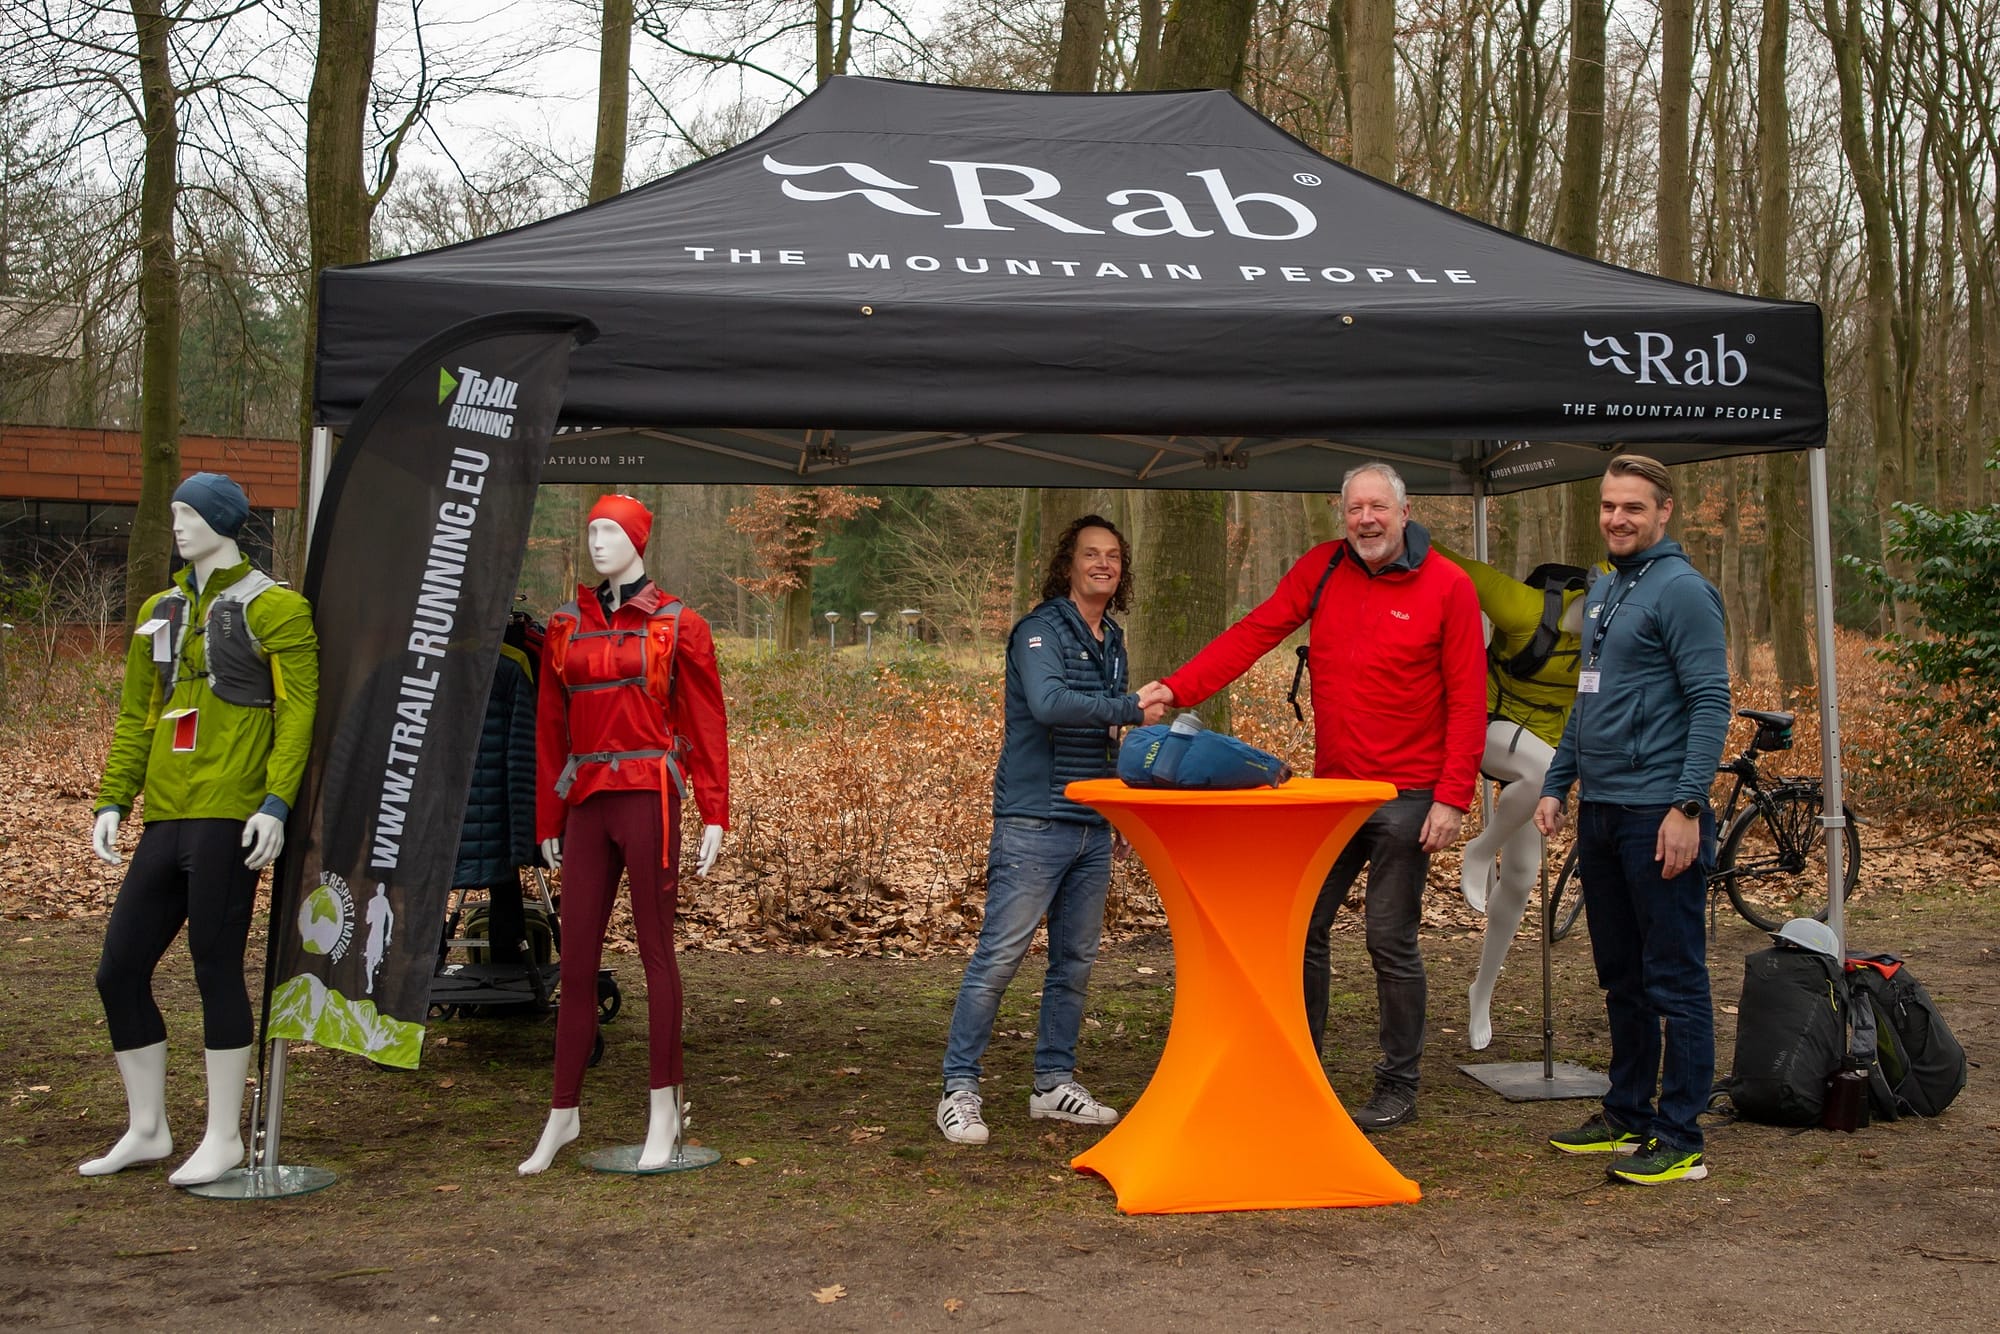 Rab Partners With Trailrunning Europe To Help Build Running Community